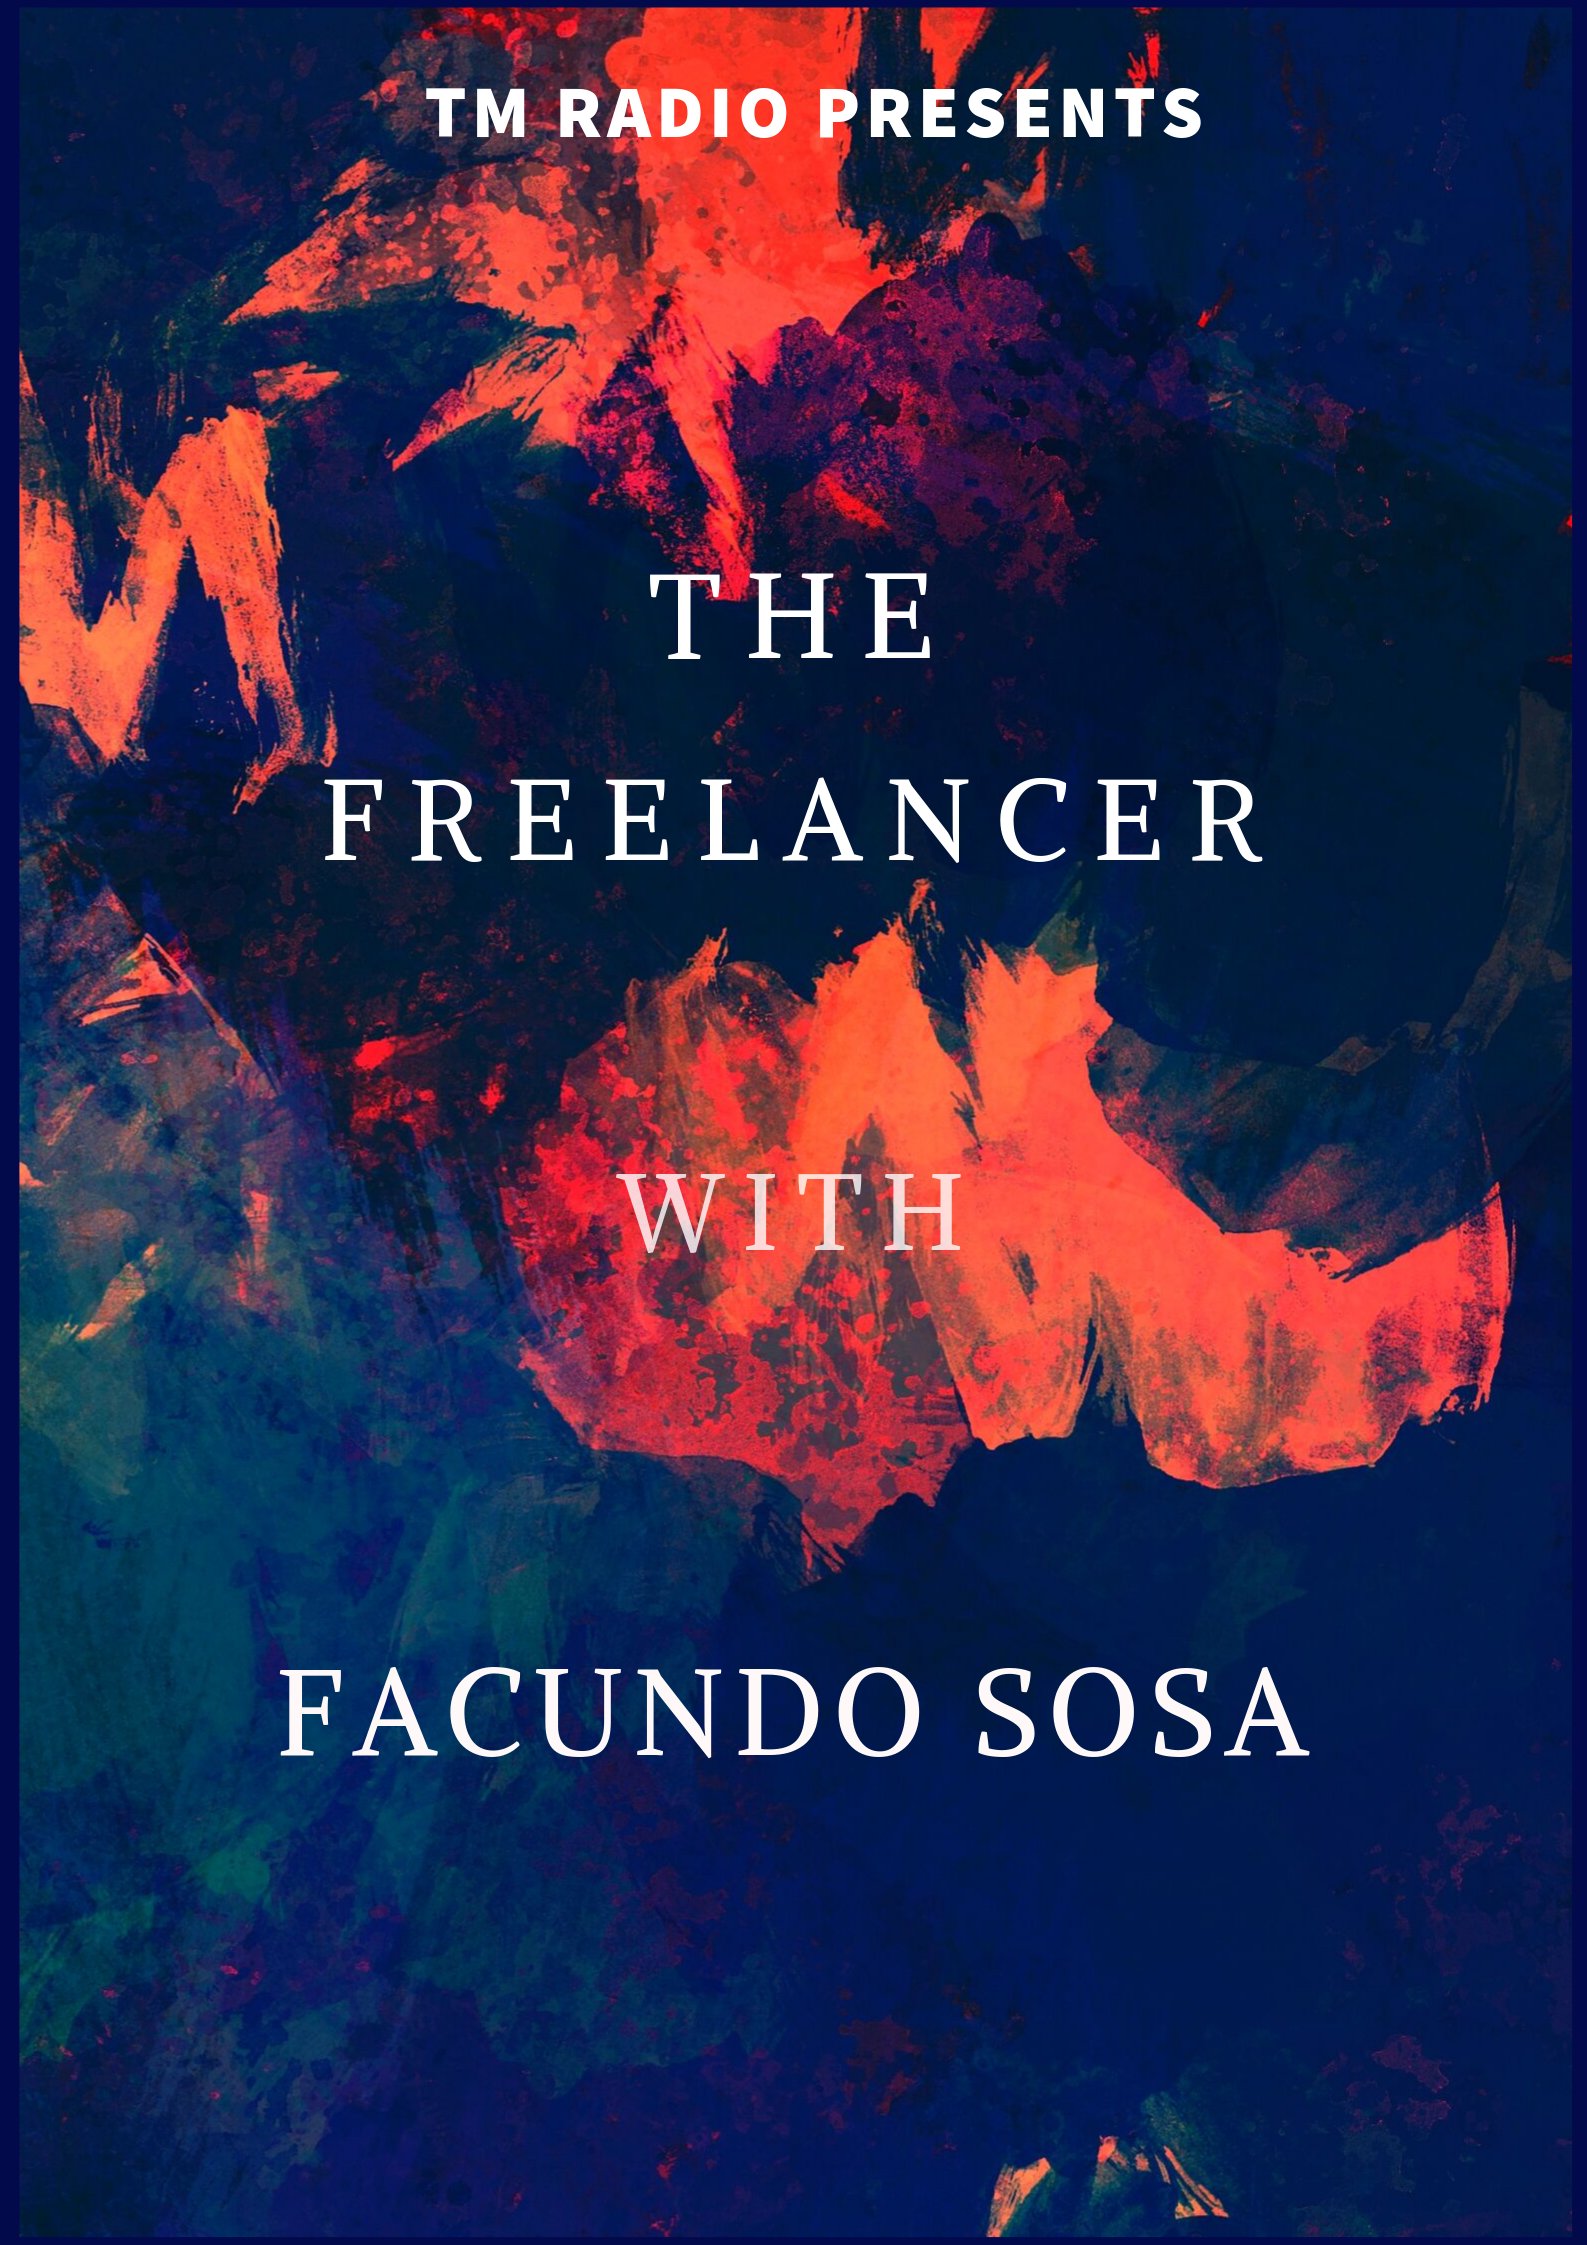 The Freelancer :: Episode 013 (aired on May 30th, 2020) banner logo